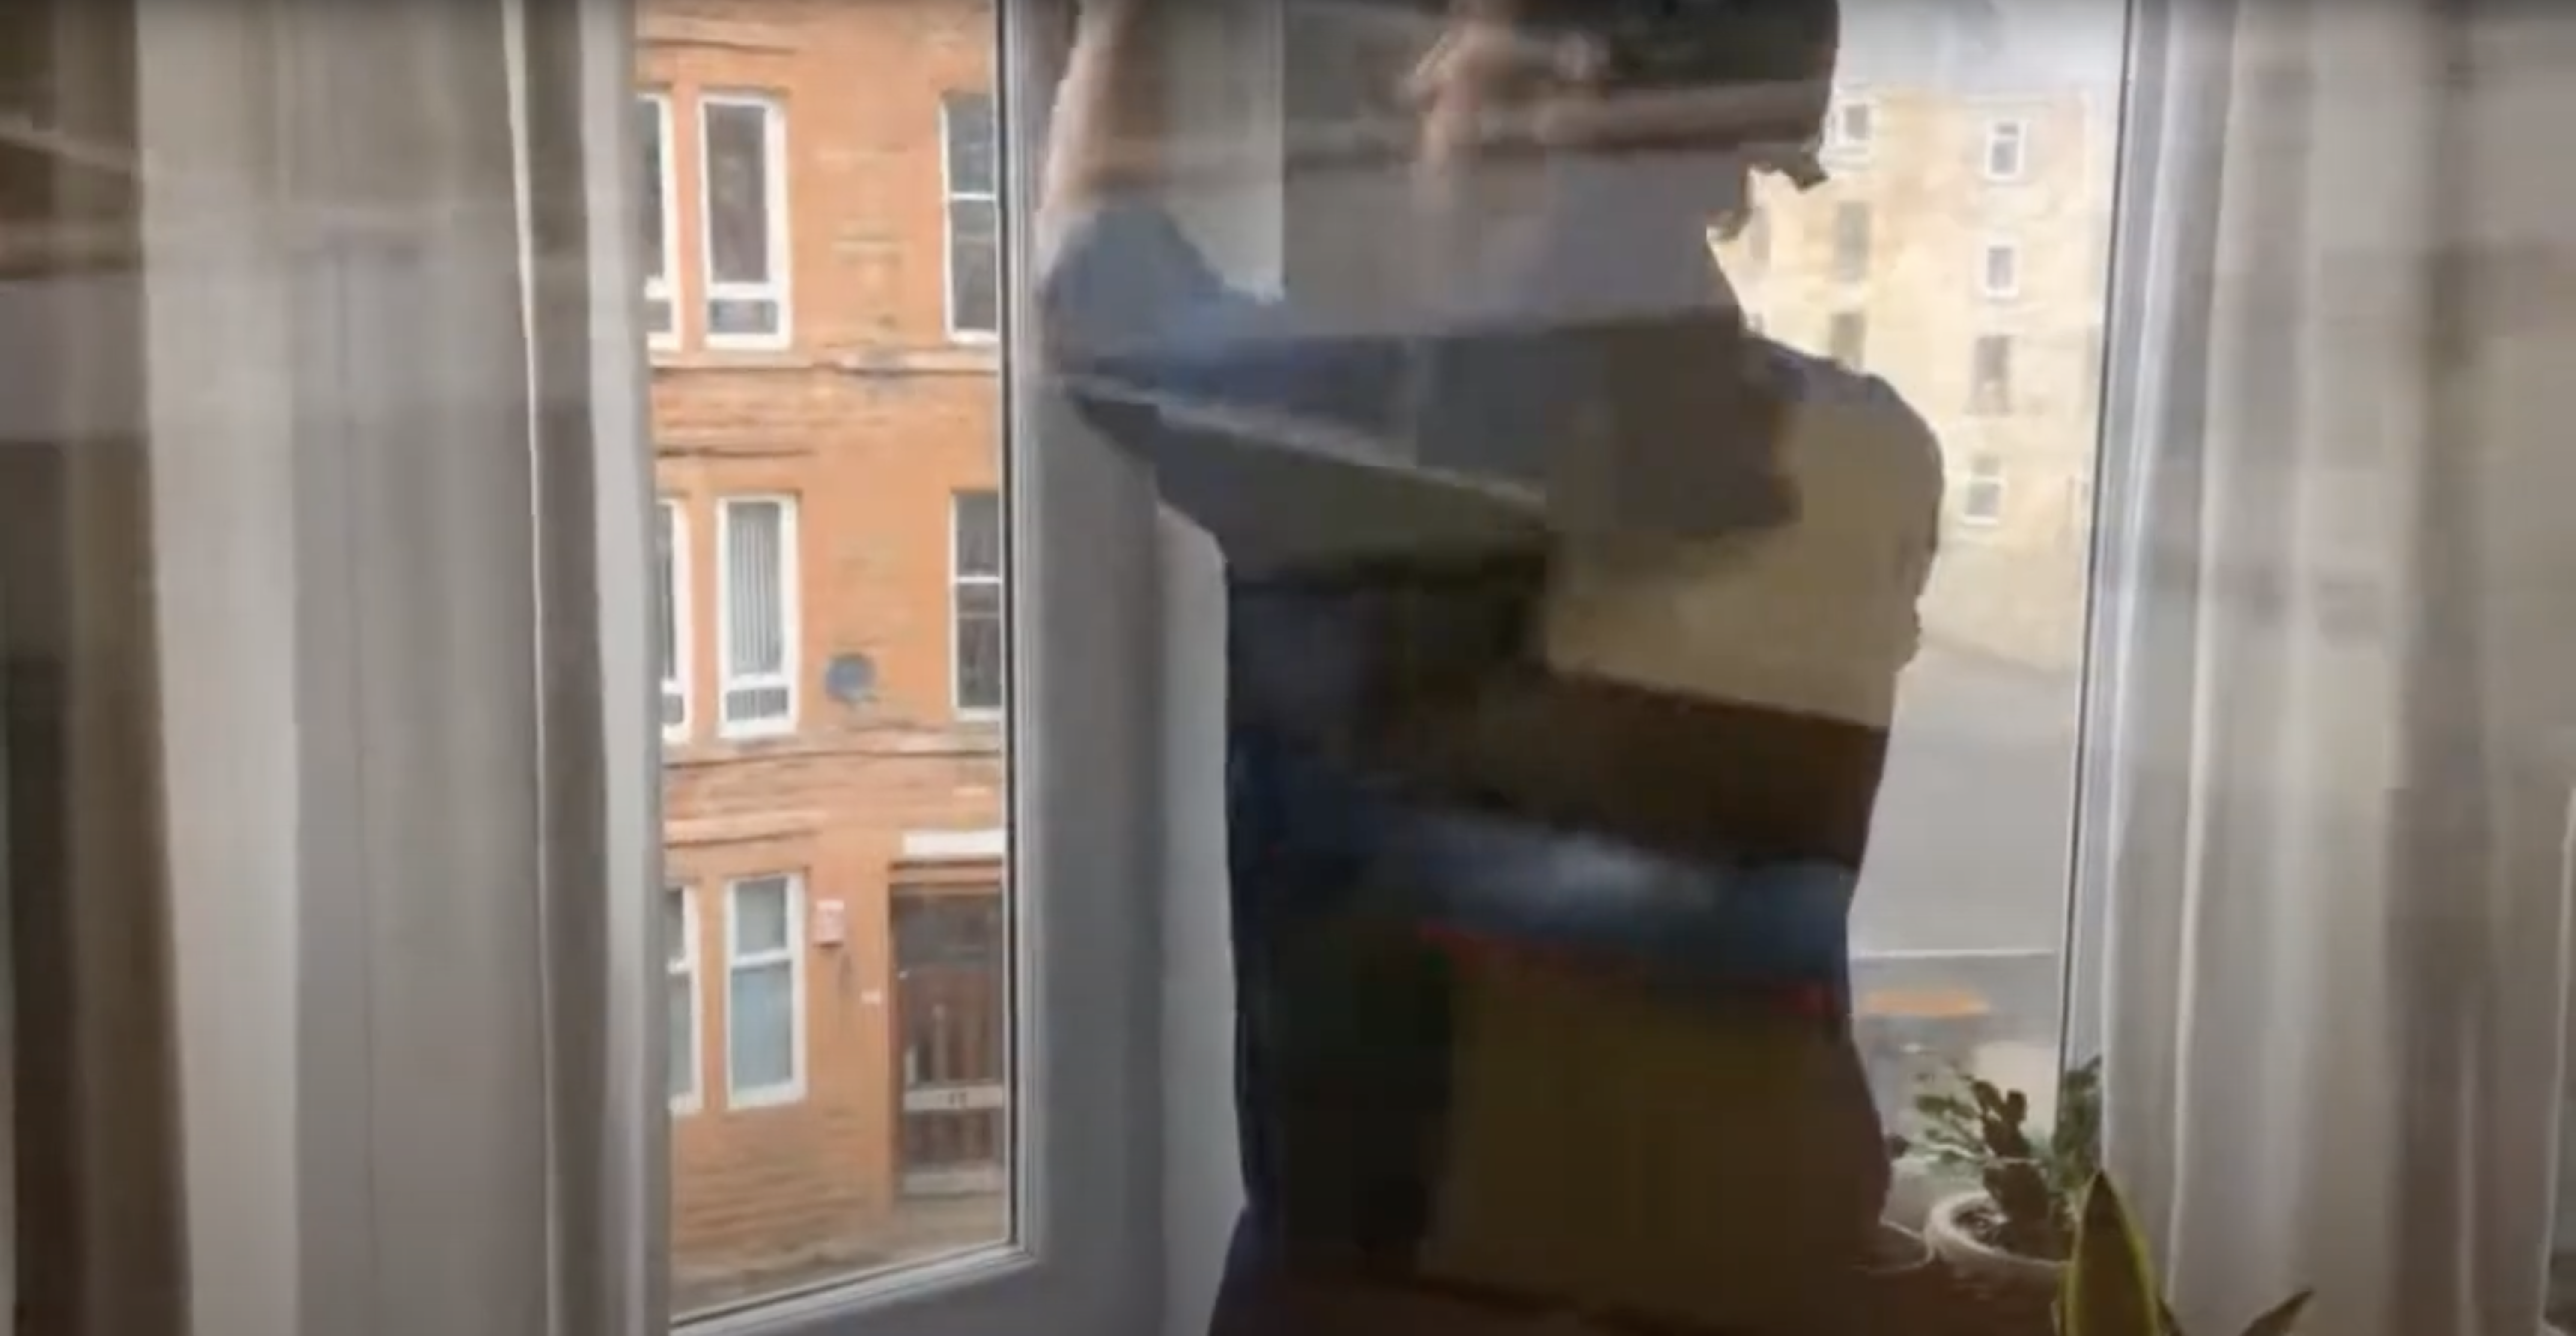 An artistic still from a music video with a person opening a window.